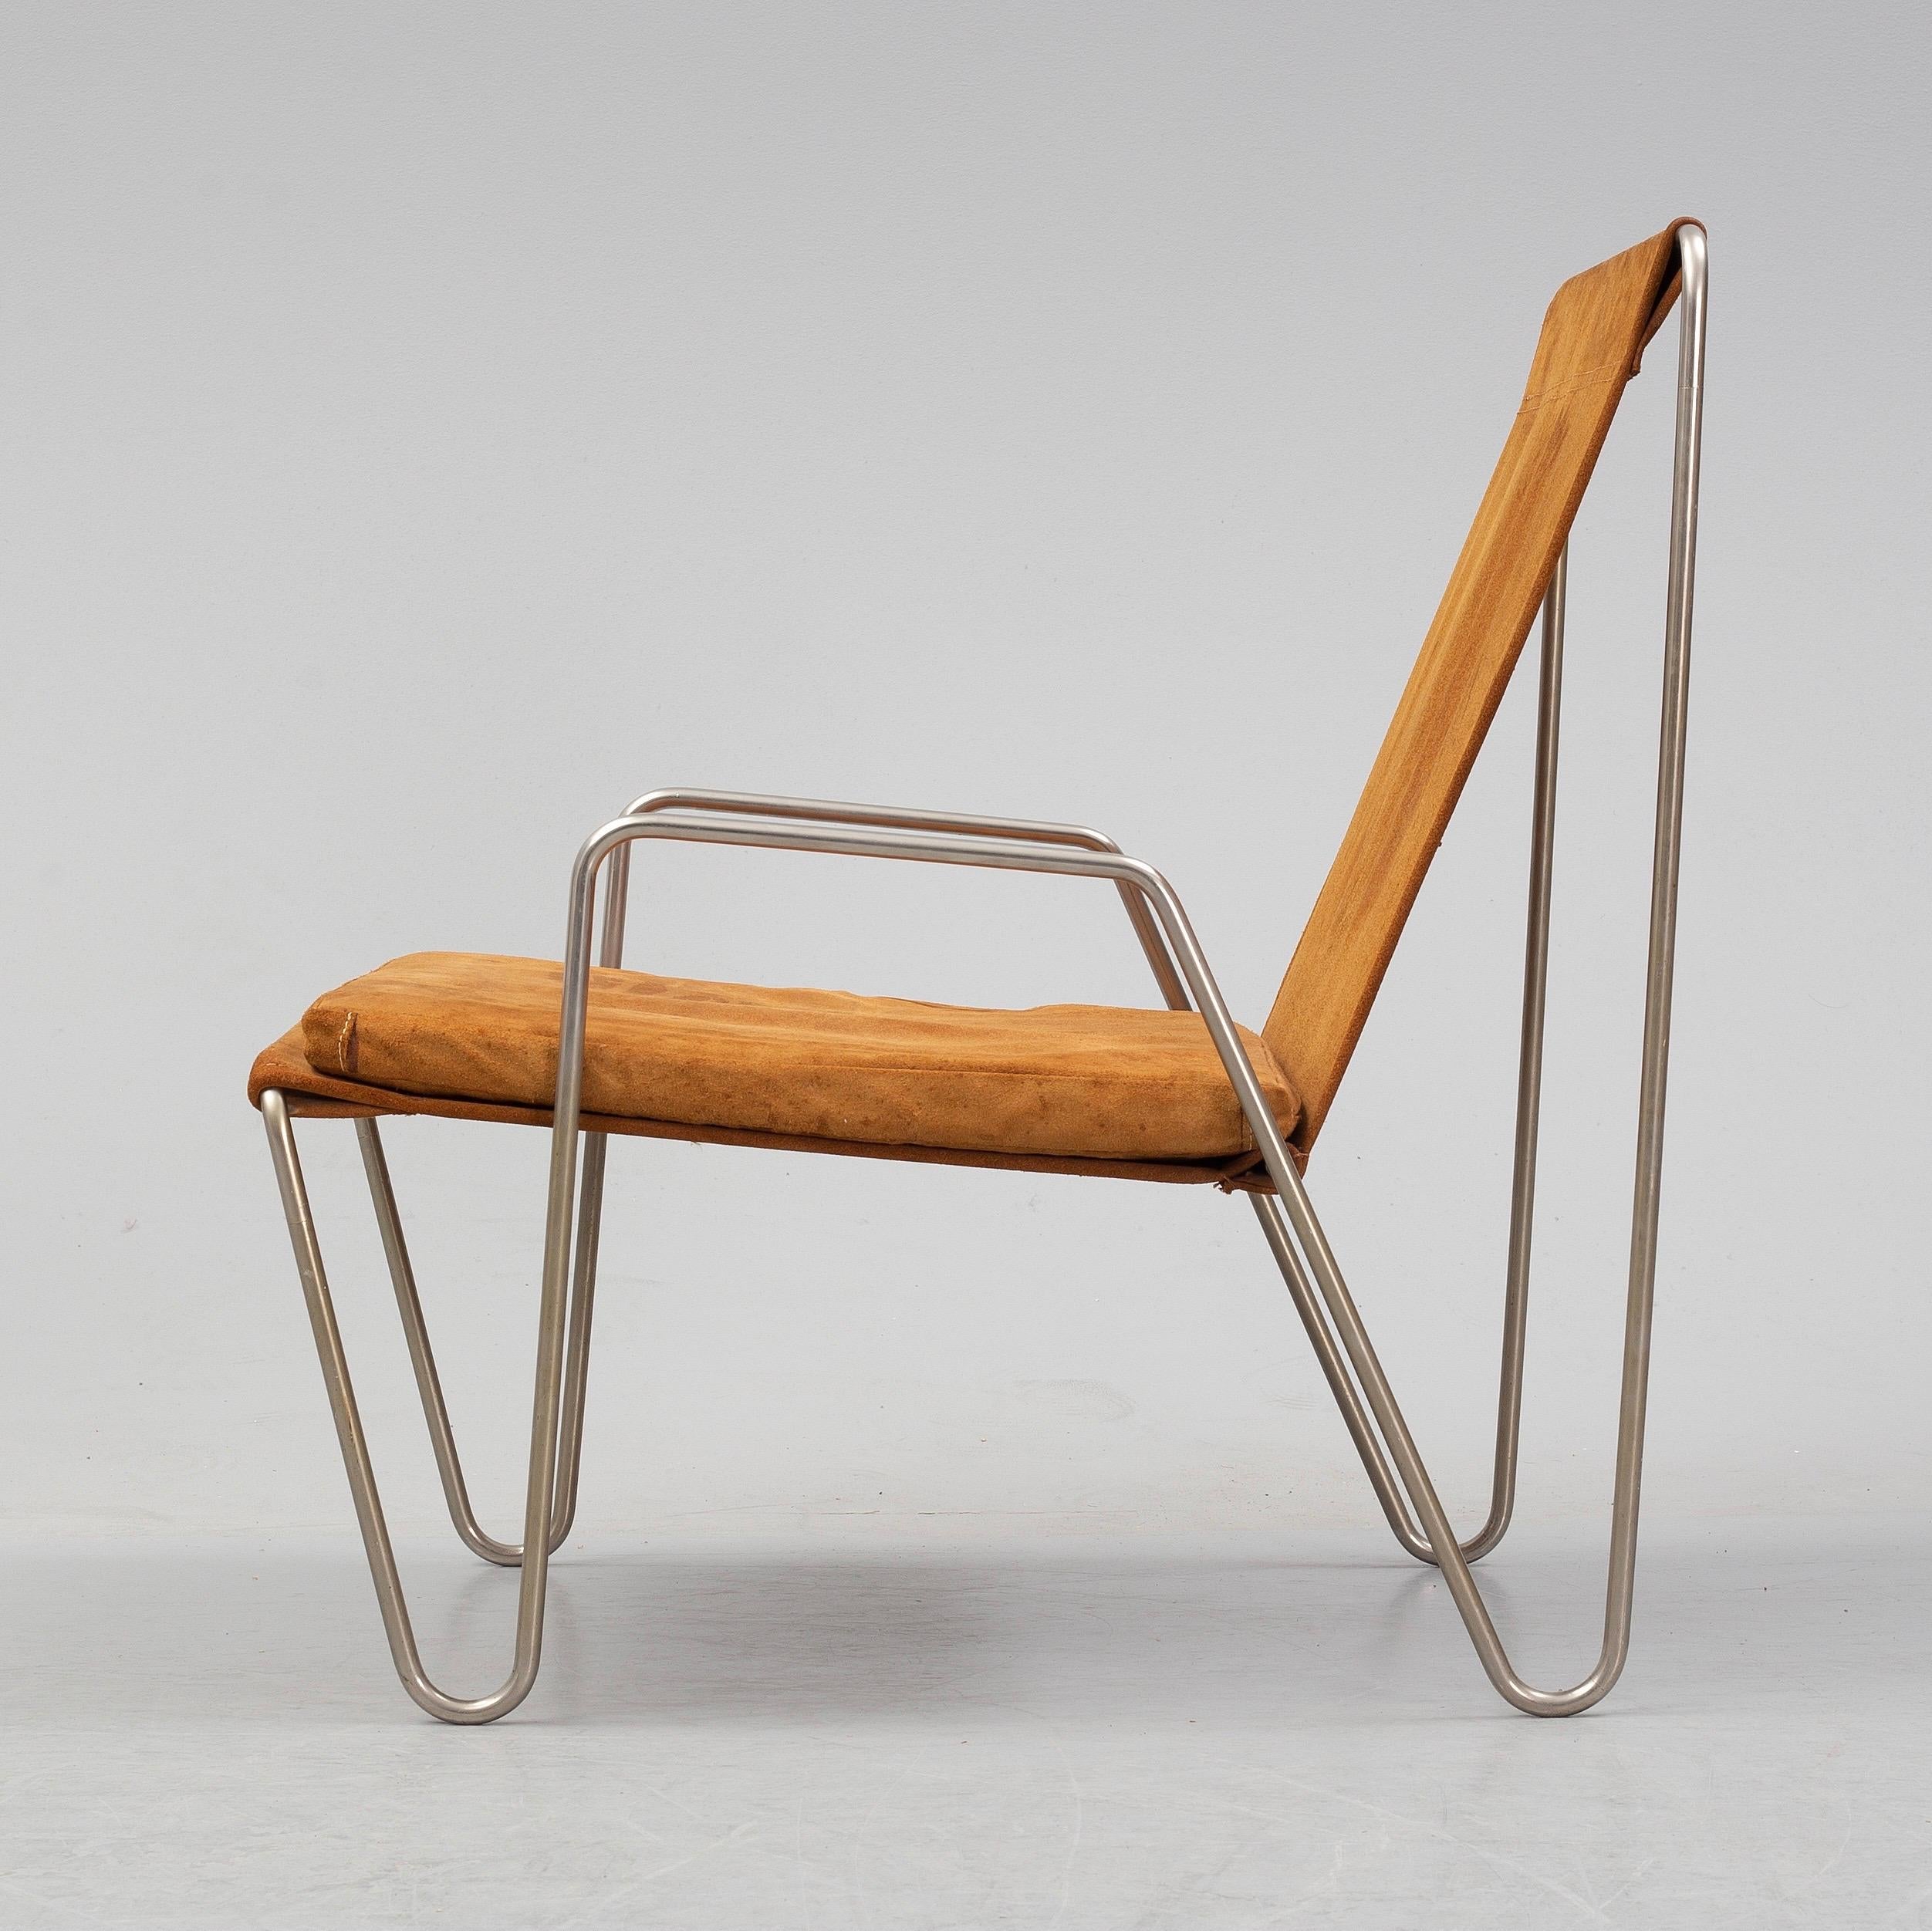 Bachelor easy chair made in brown suede leather designed in 1955 by Verner Panton, made by Fritz Hansen in Denmark.